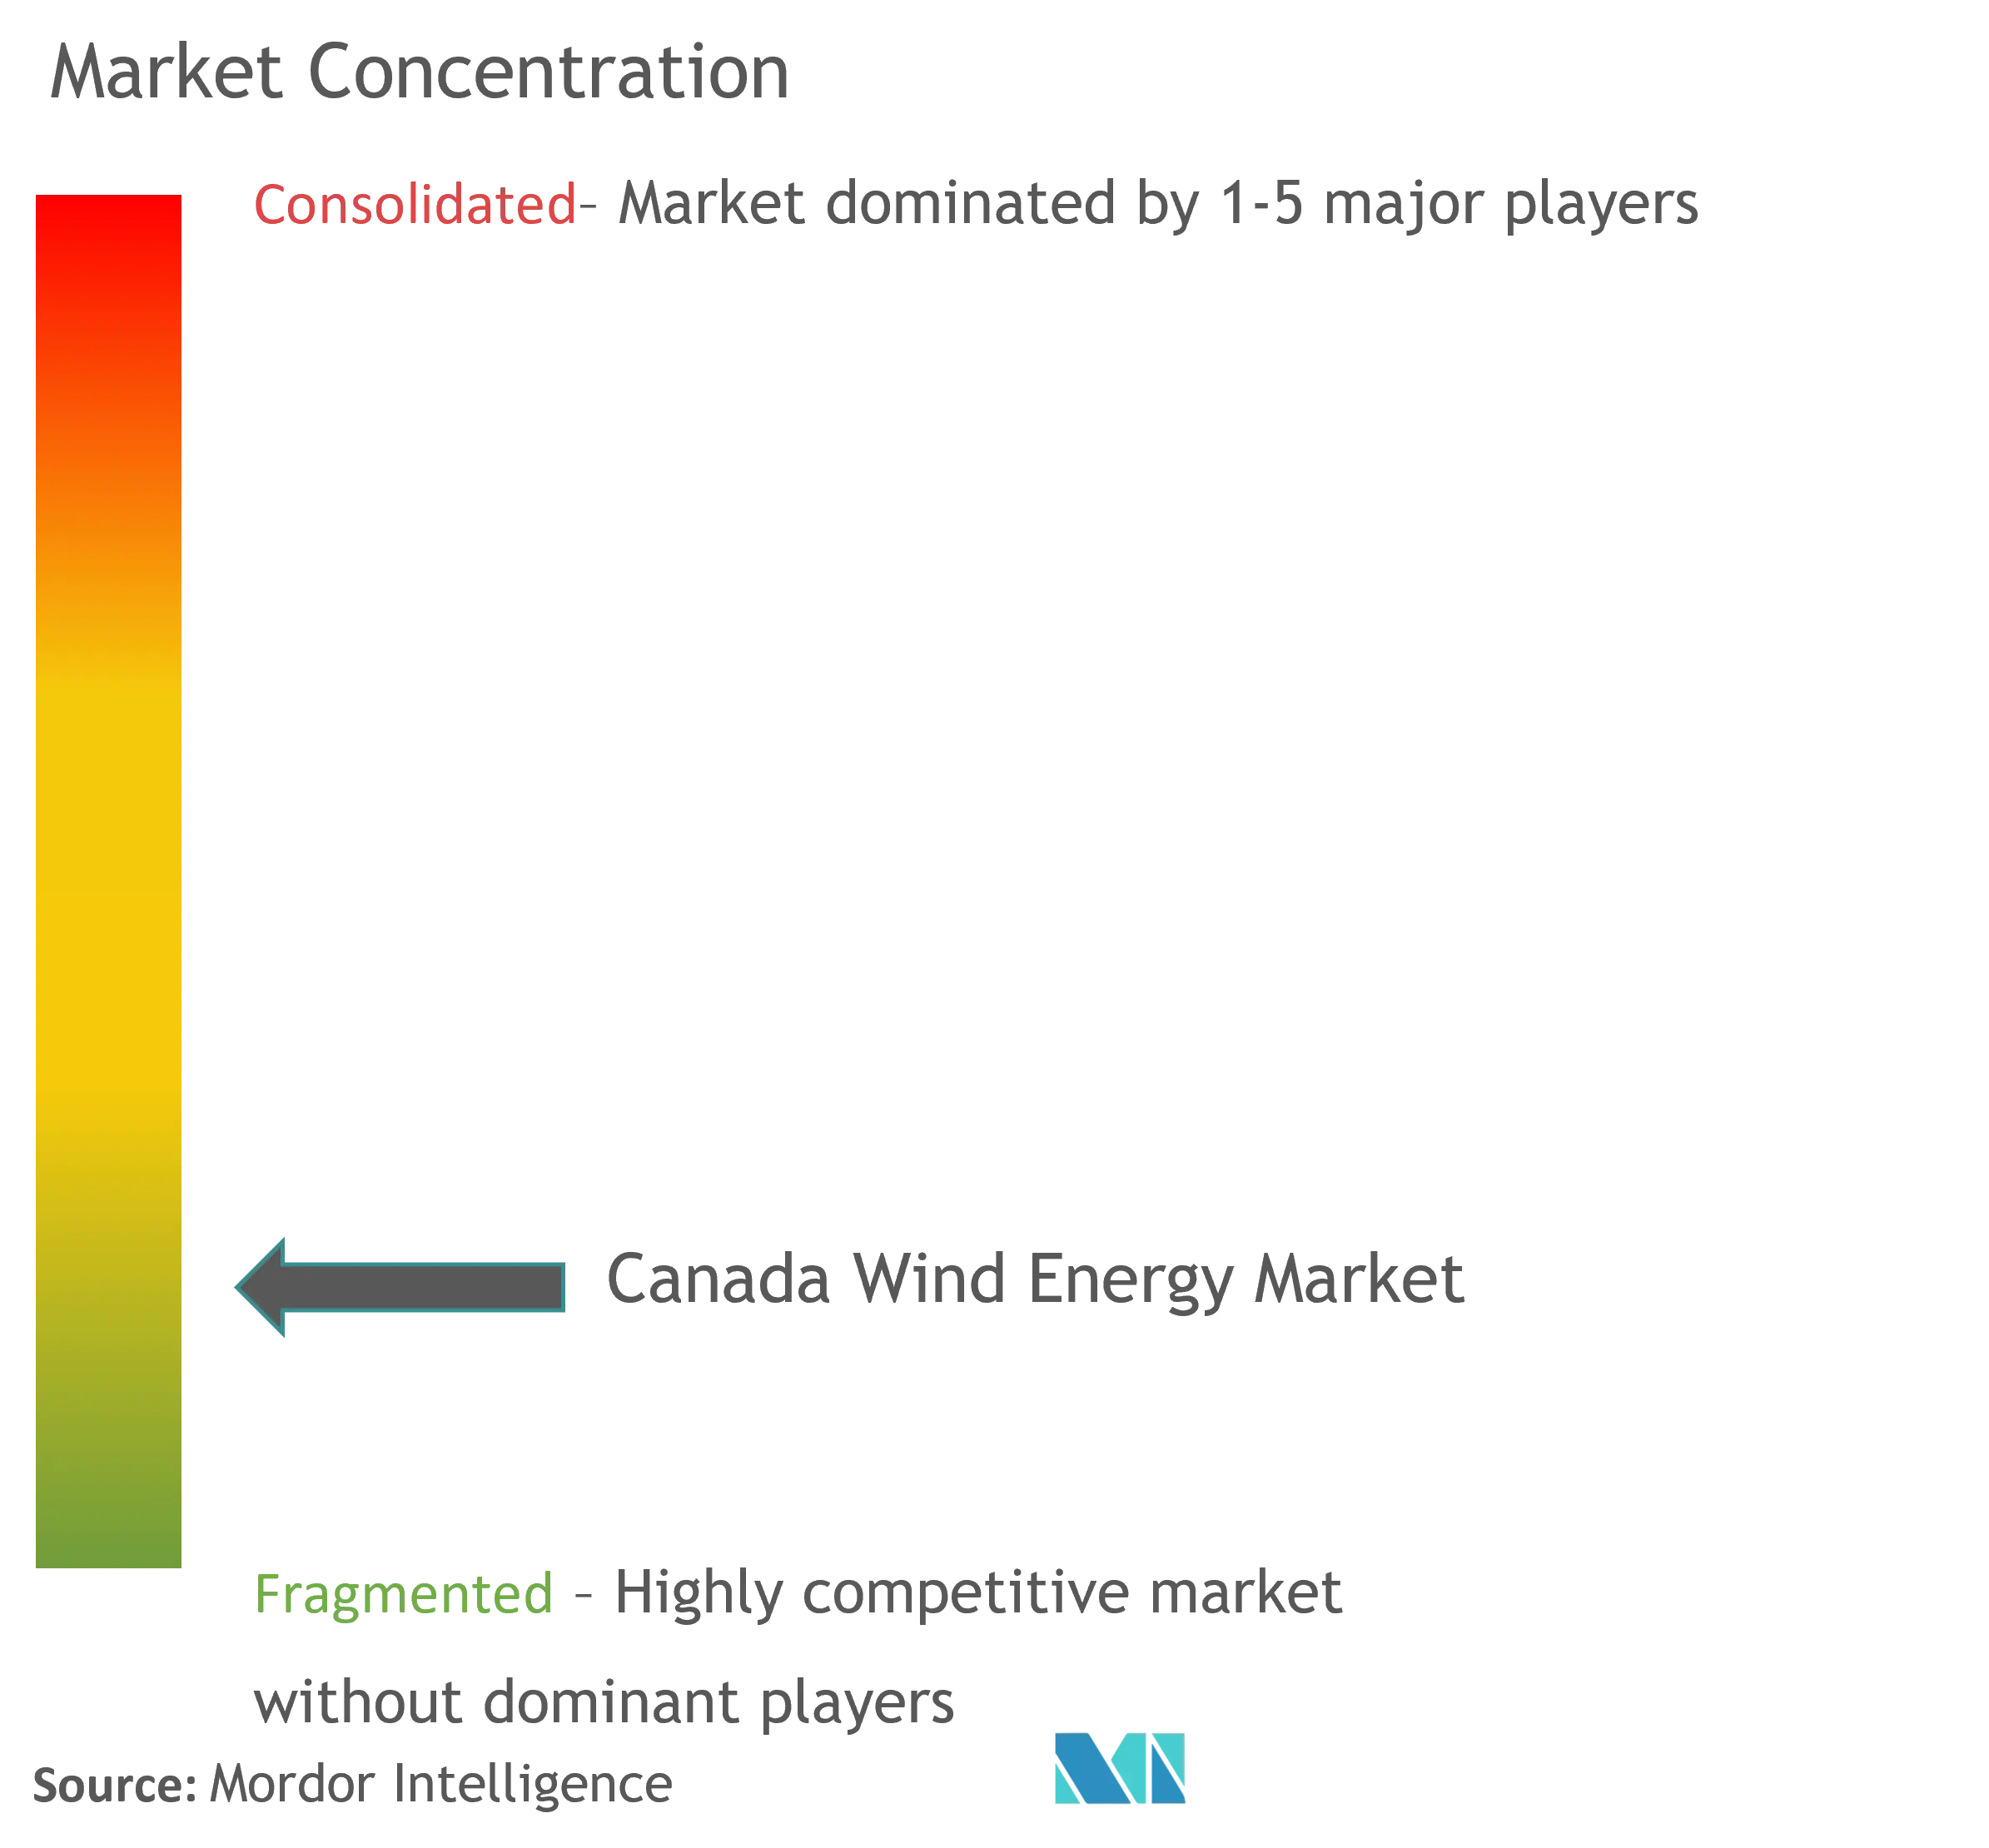 Canada Wind Energy Market Concentration